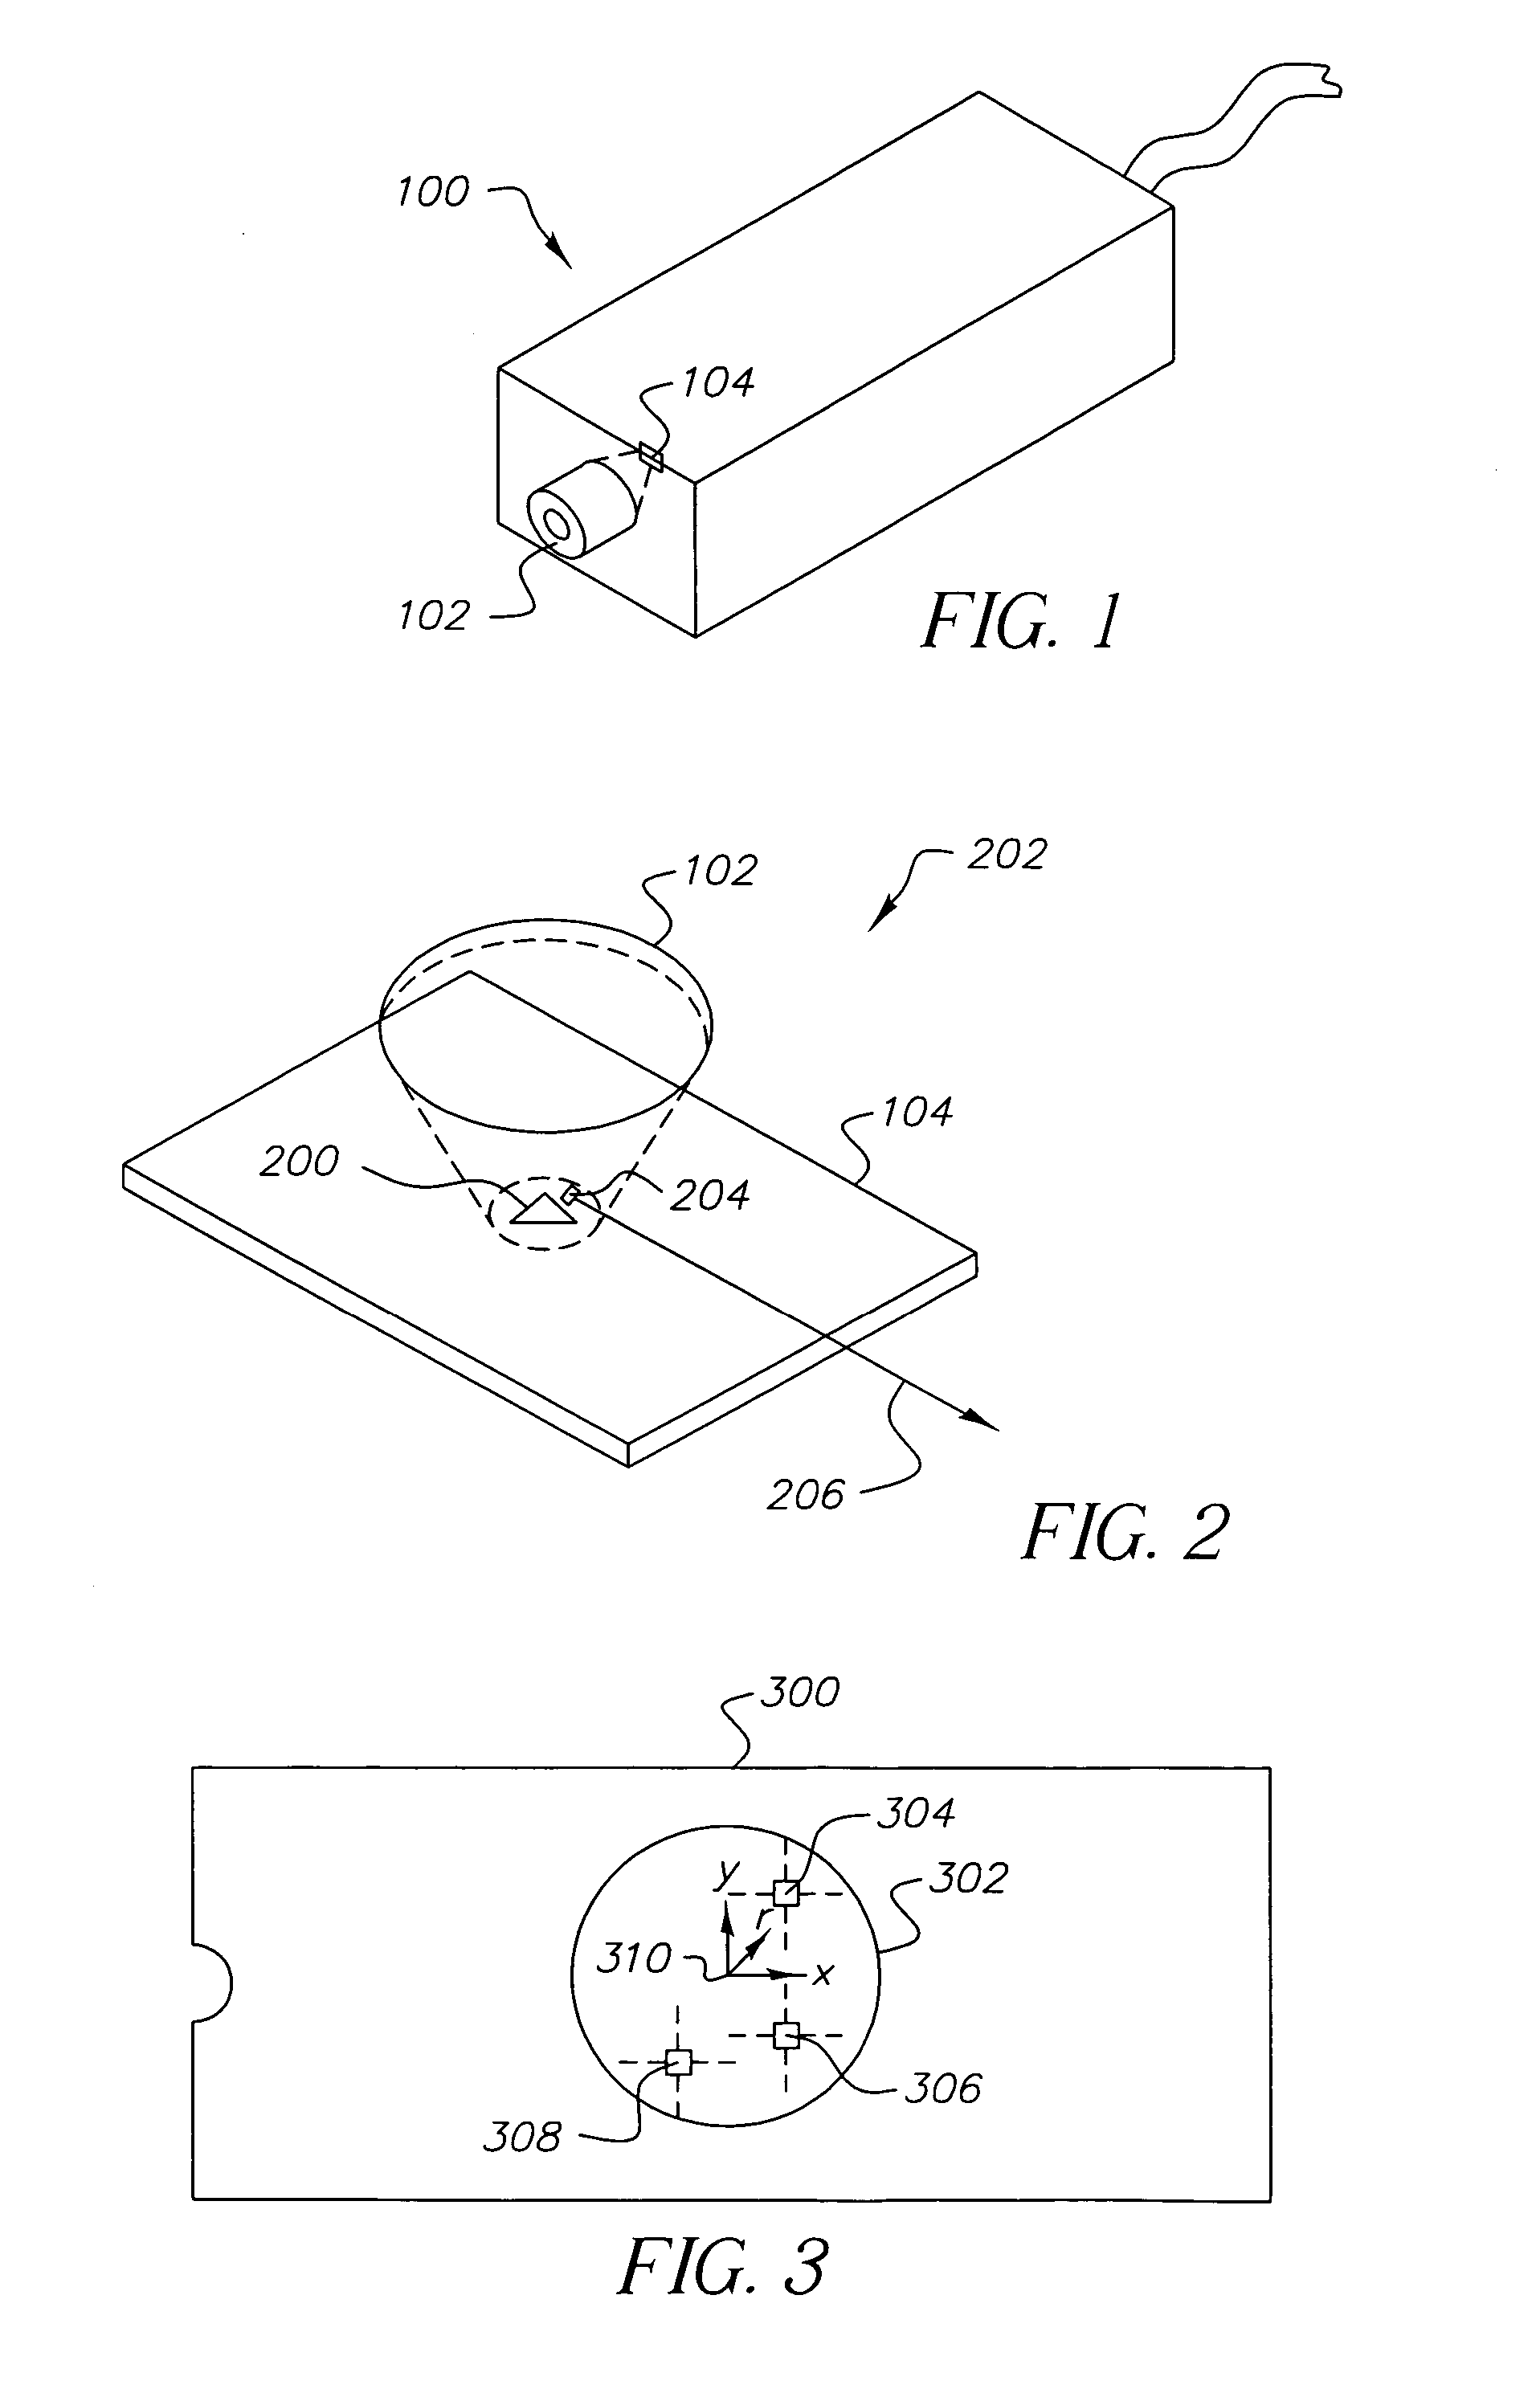 Electronic imaging system having a sensor for correcting perspective projection distortion